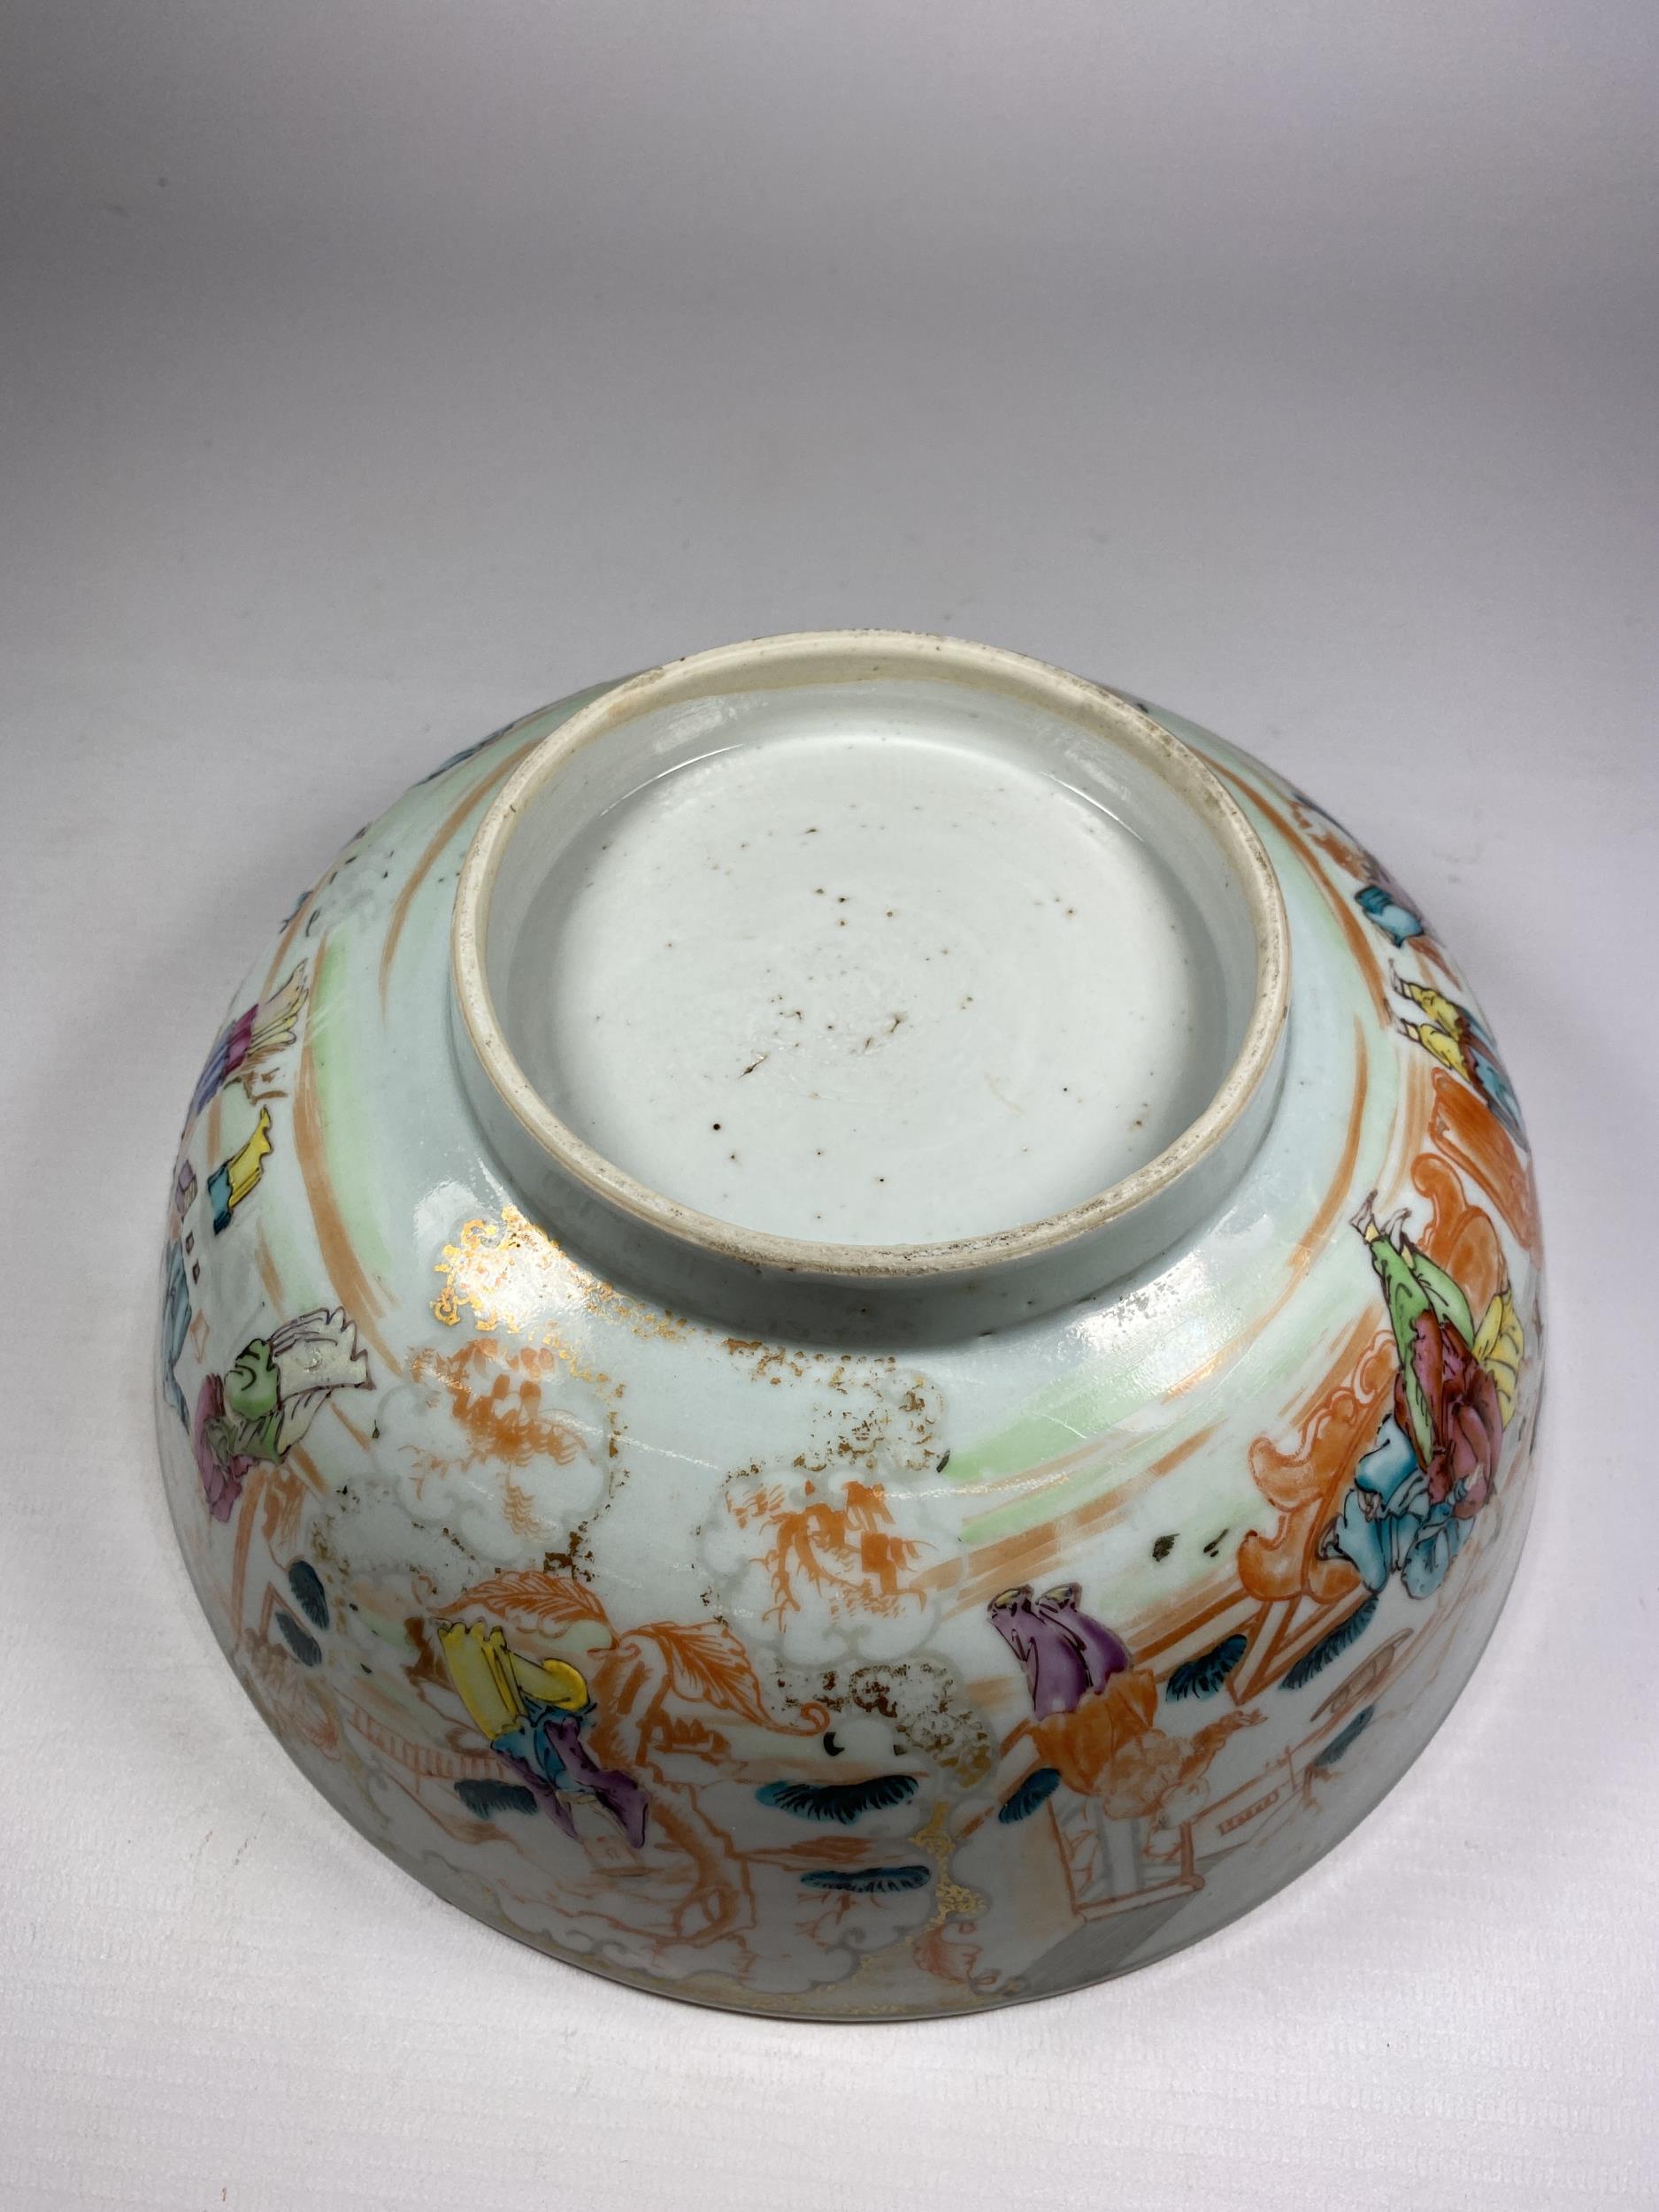 A LATE 18TH CENTURY CHINESE PORCELAIN PUNCH / FRUIT BOWL DEPICTING FIGURES, DIAMETER 23CM (A/F) - Image 6 of 9